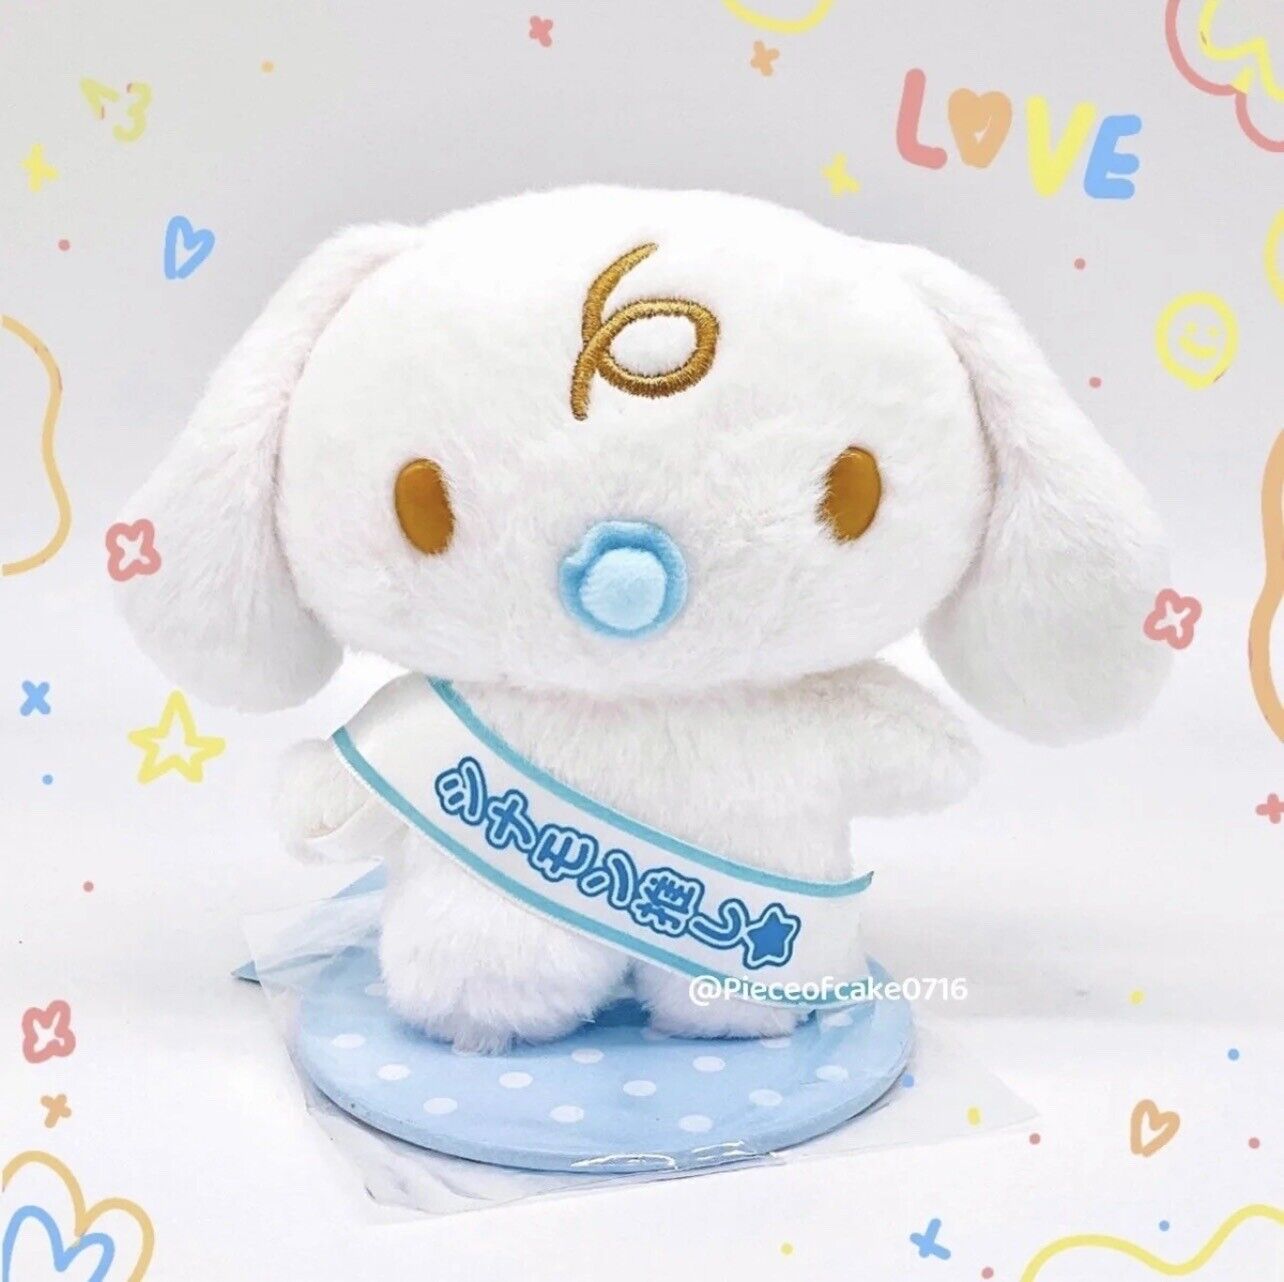 Sanrio Milk Magnet (S Size) Plush Doll 4th Generation 2022 from Japan